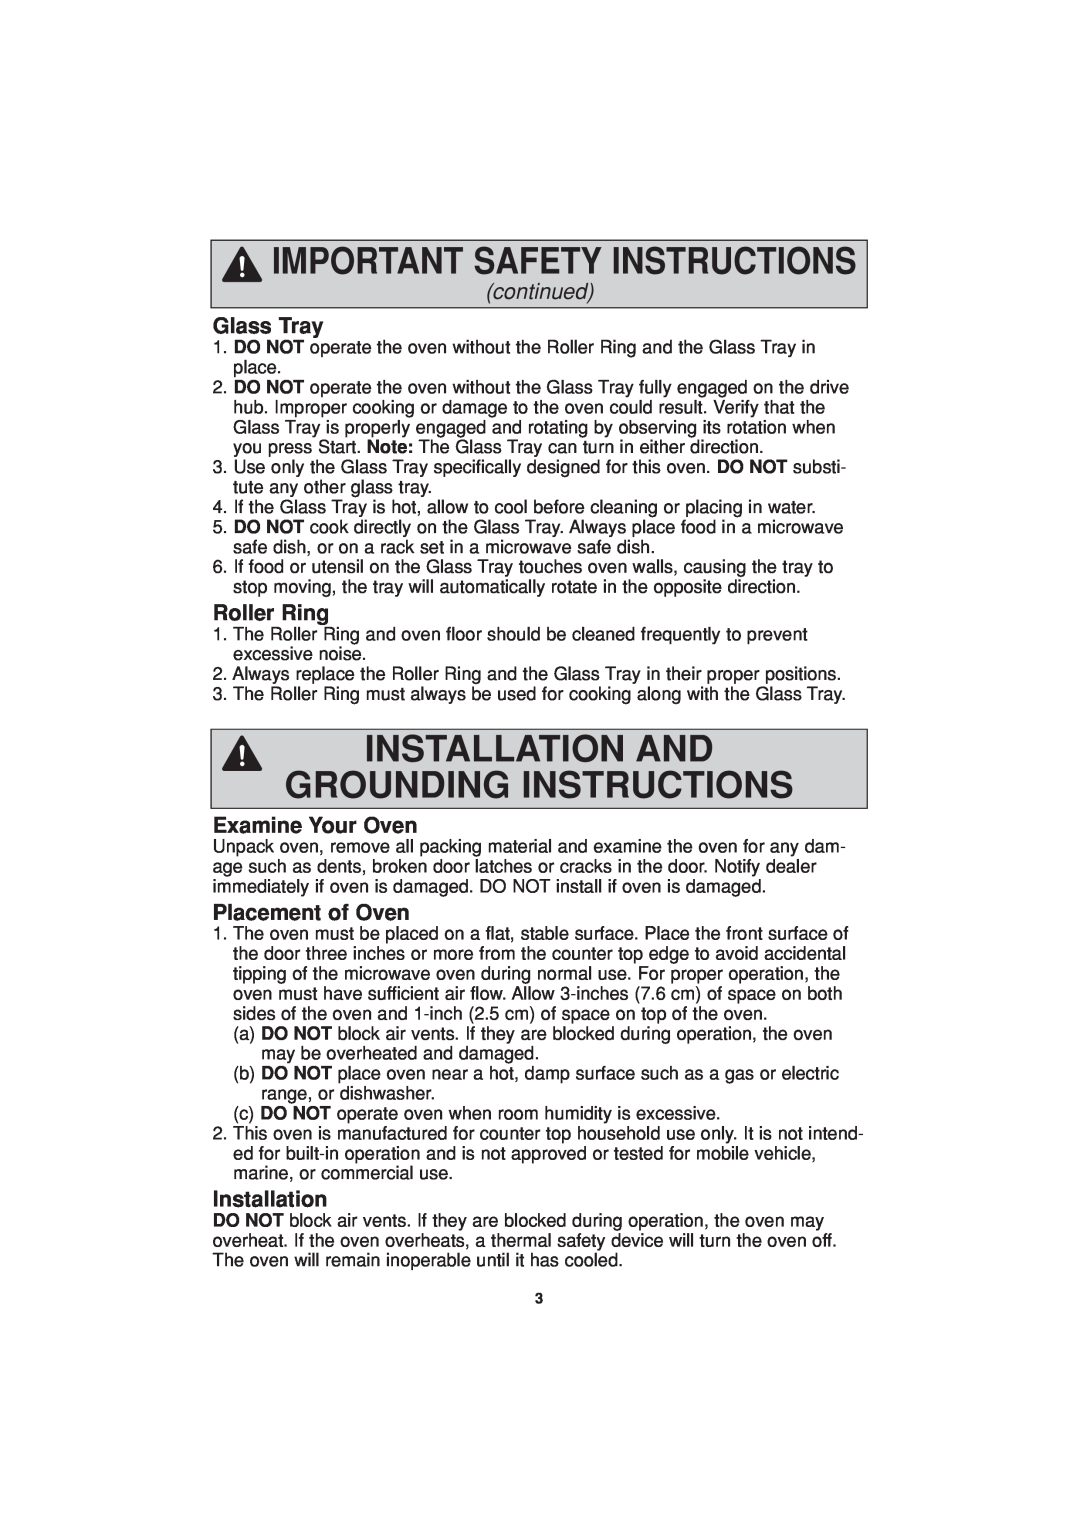 Panasonic NN-H624 Installation And Grounding Instructions, Glass Tray, Roller Ring, Examine Your Oven, Placement of Oven 